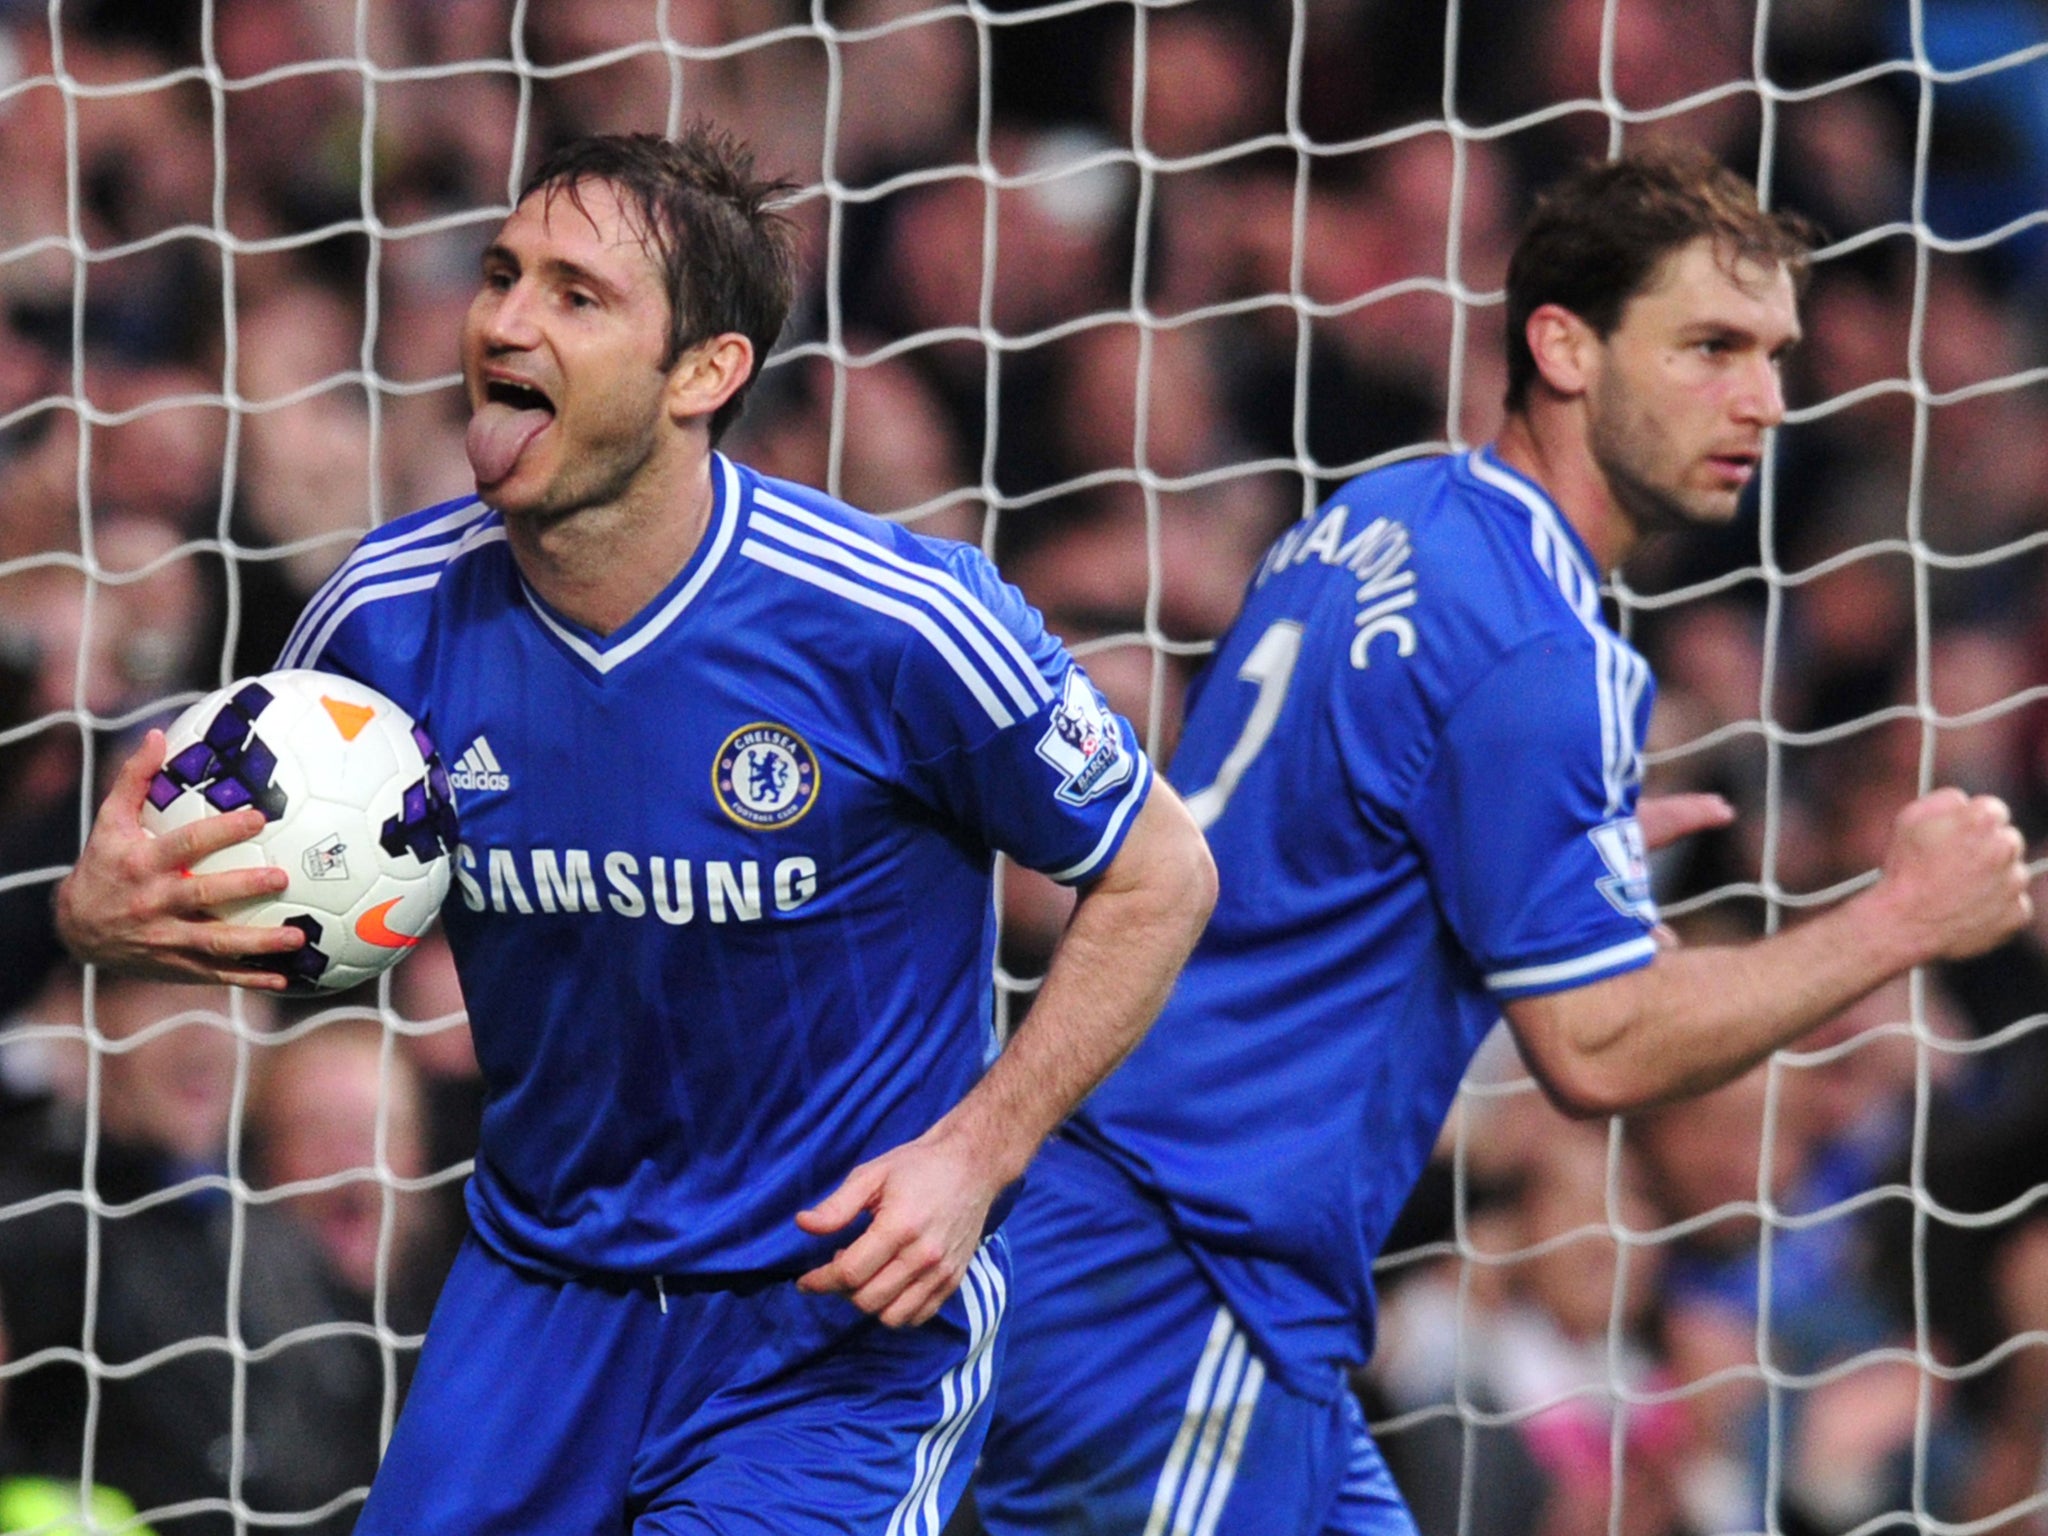 Frank Lampard celebrates after scoring the rebound from his saved penalty